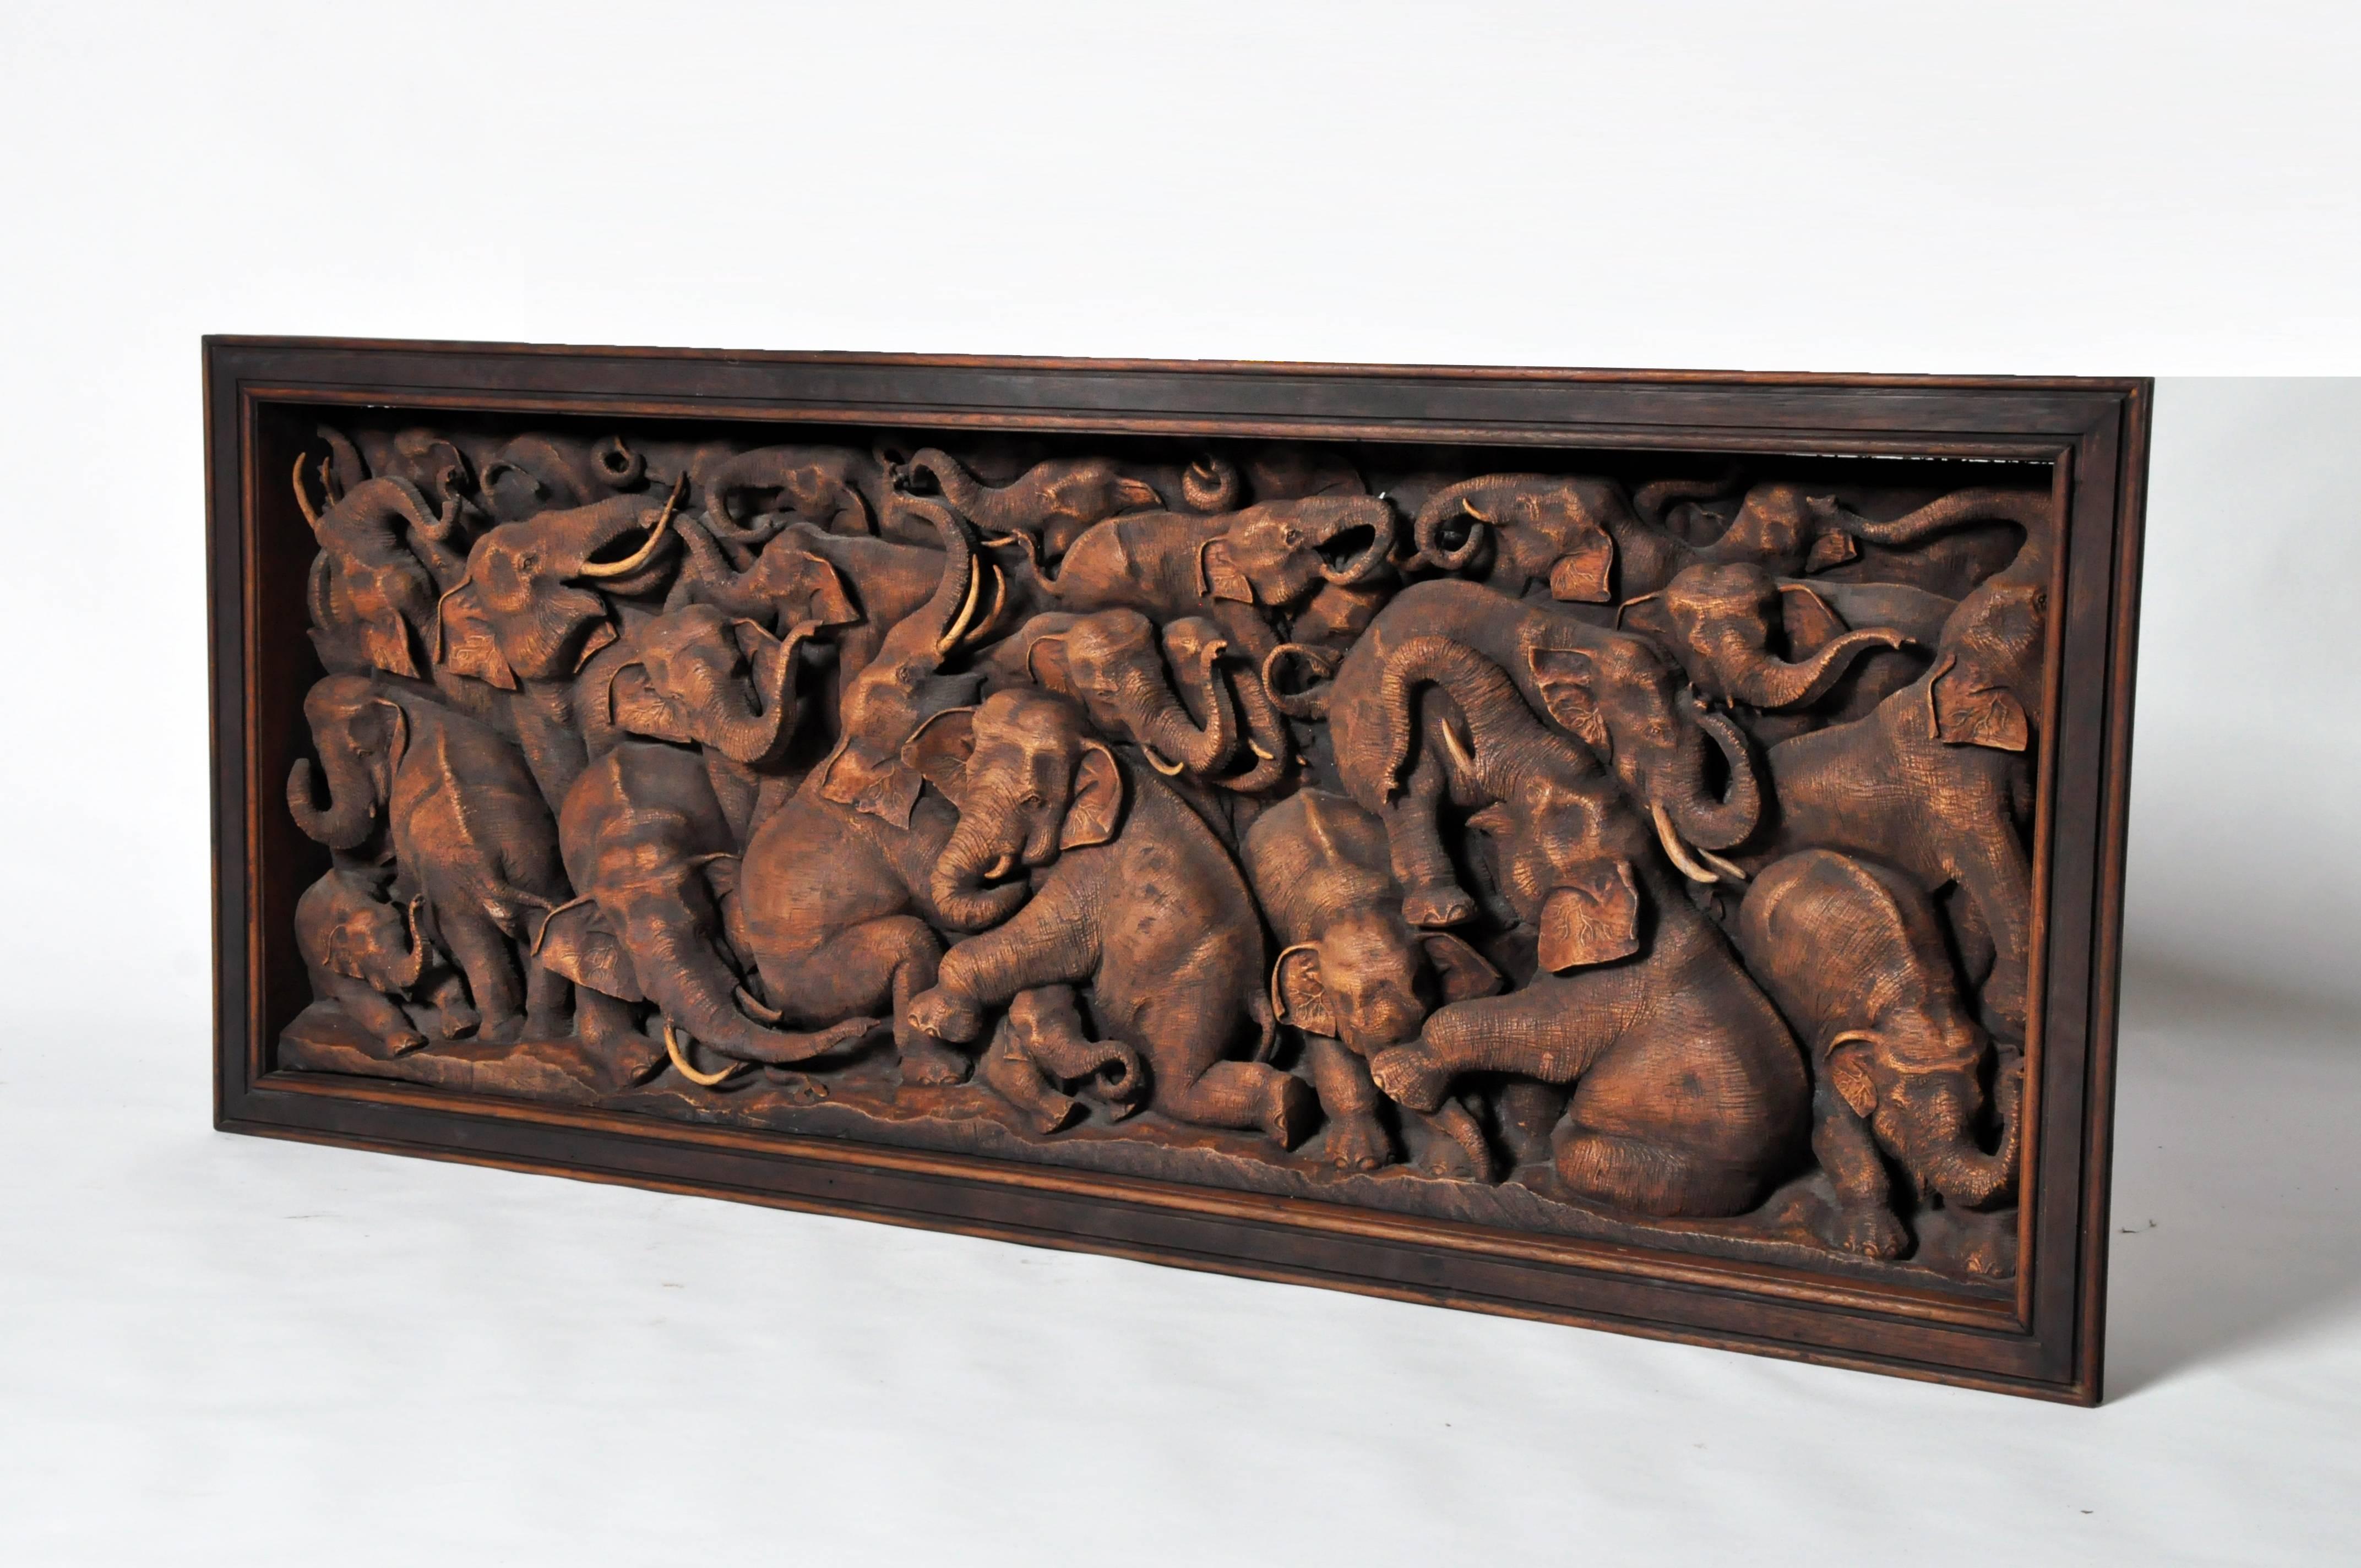 This recently hand-carved wall sculptures depicts a herd of elephants of various sizes and positions. It is from Thailand and is made from teakwood.